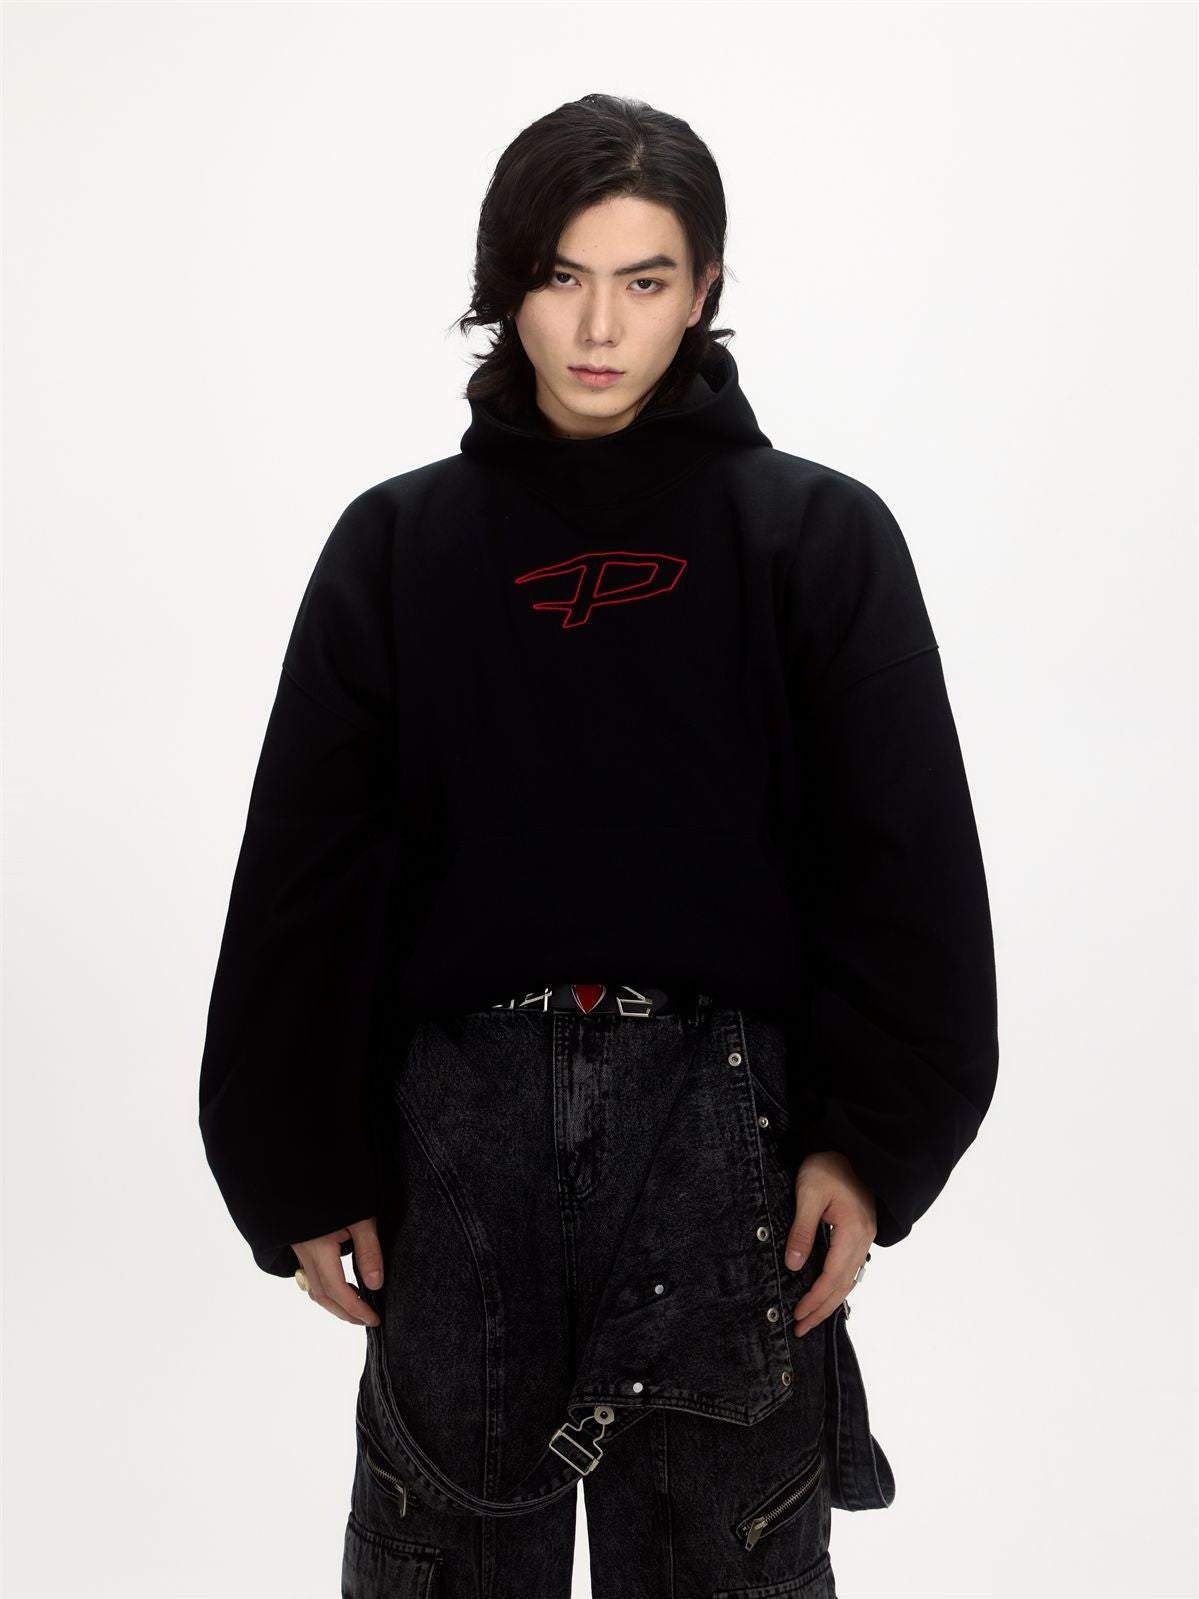 ARCANA ARCHIVE  Parka　パーカーARCHIVE